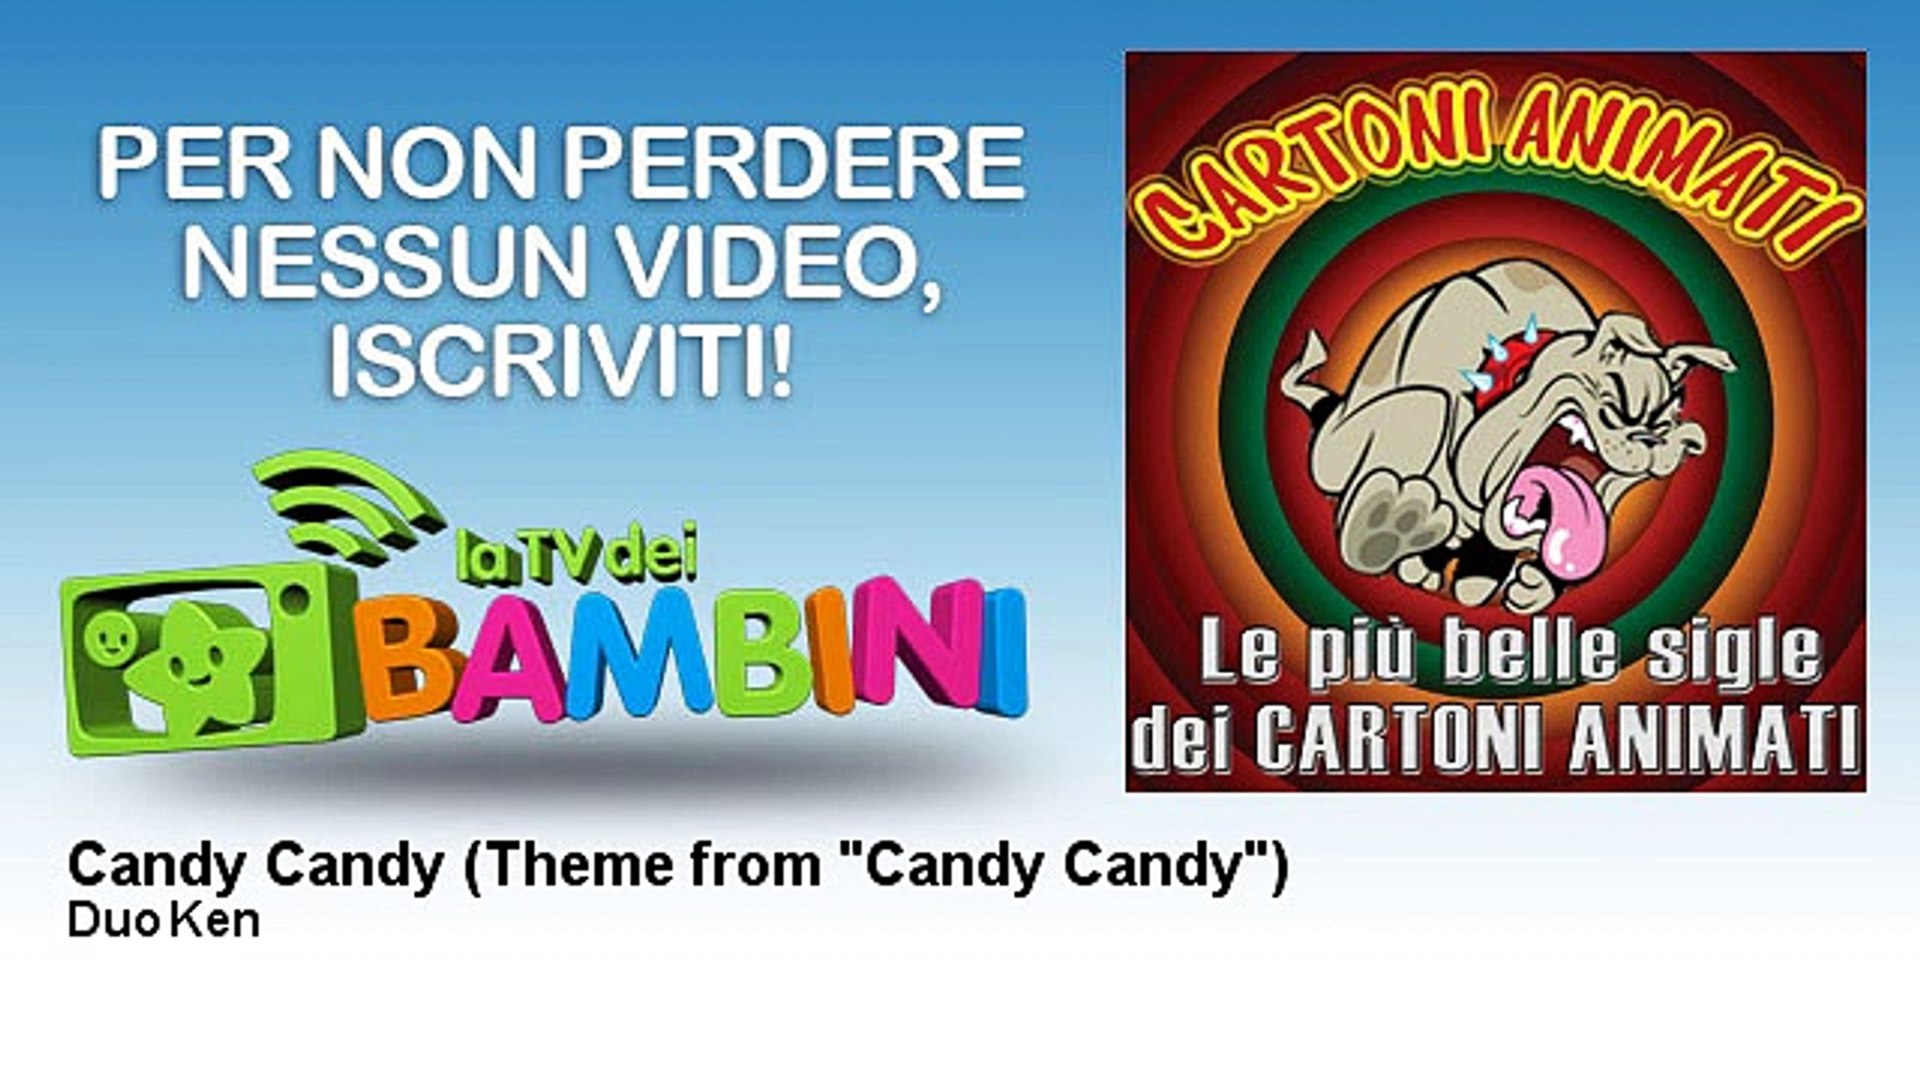 Duo Ken - Candy Candy - Theme from "Candy Candy" - feat. Double Zero -  Vidéo Dailymotion